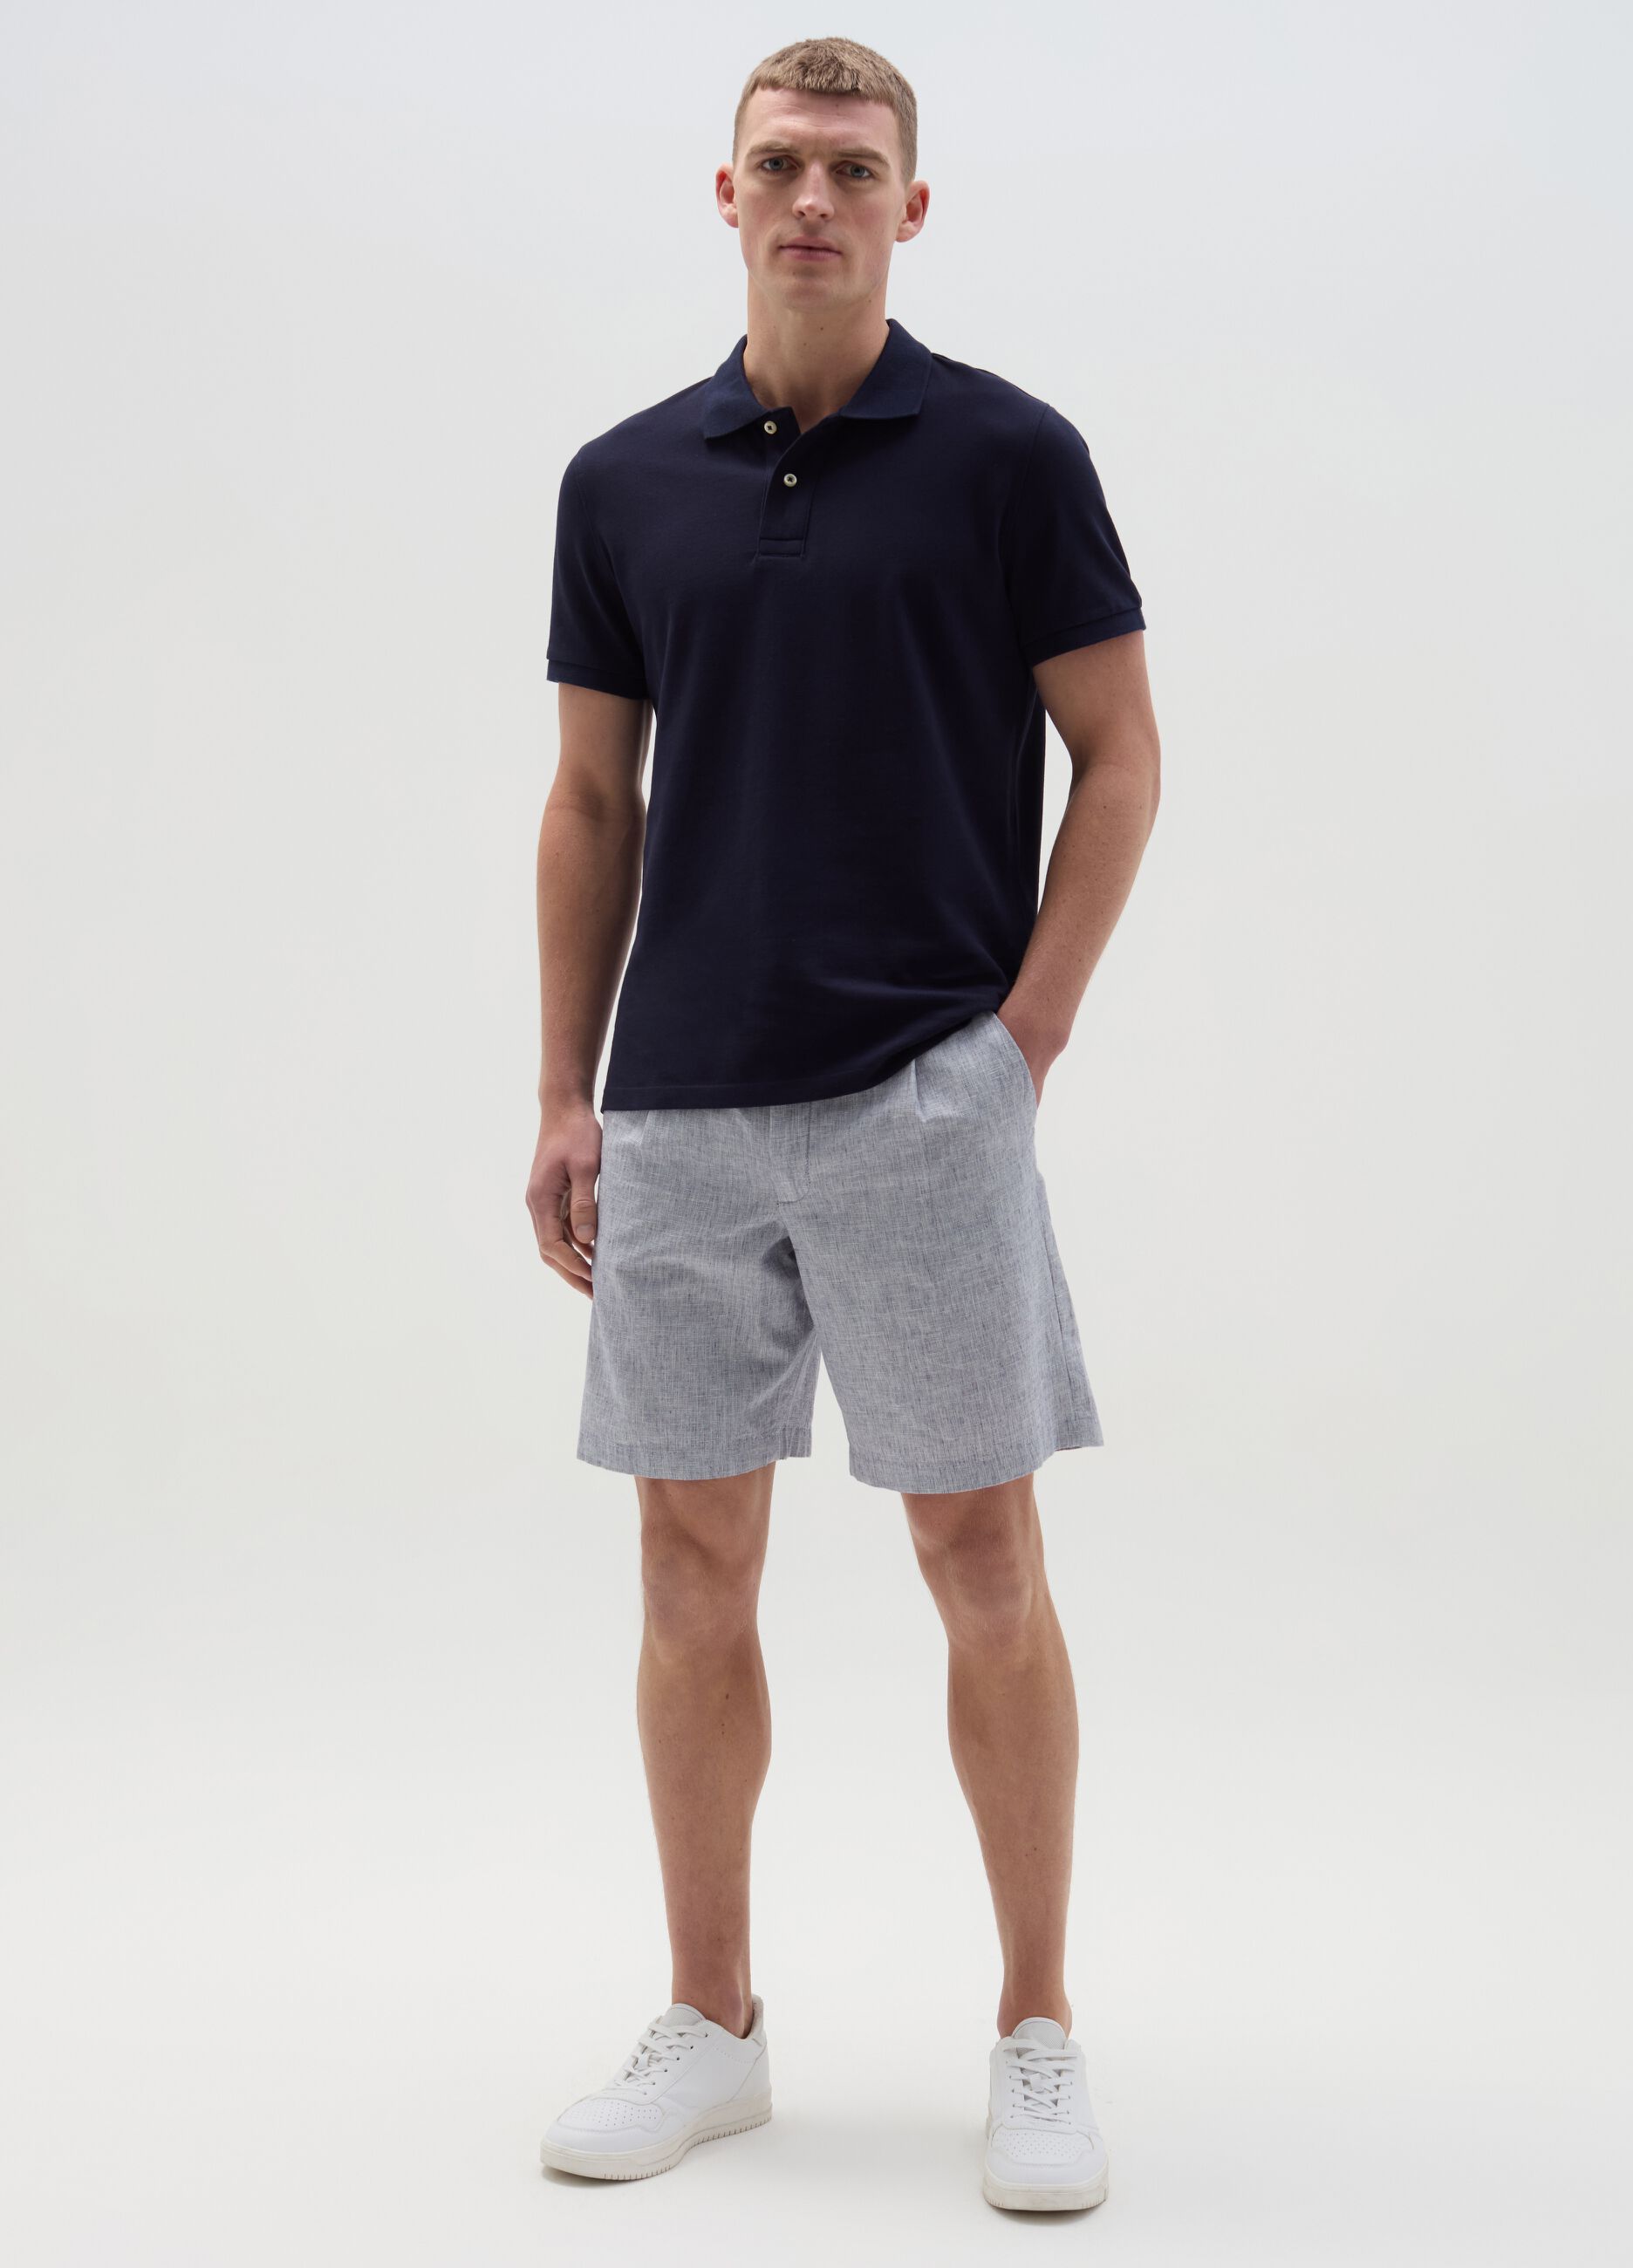 Chino Bermuda shorts with darts in cotton and linen